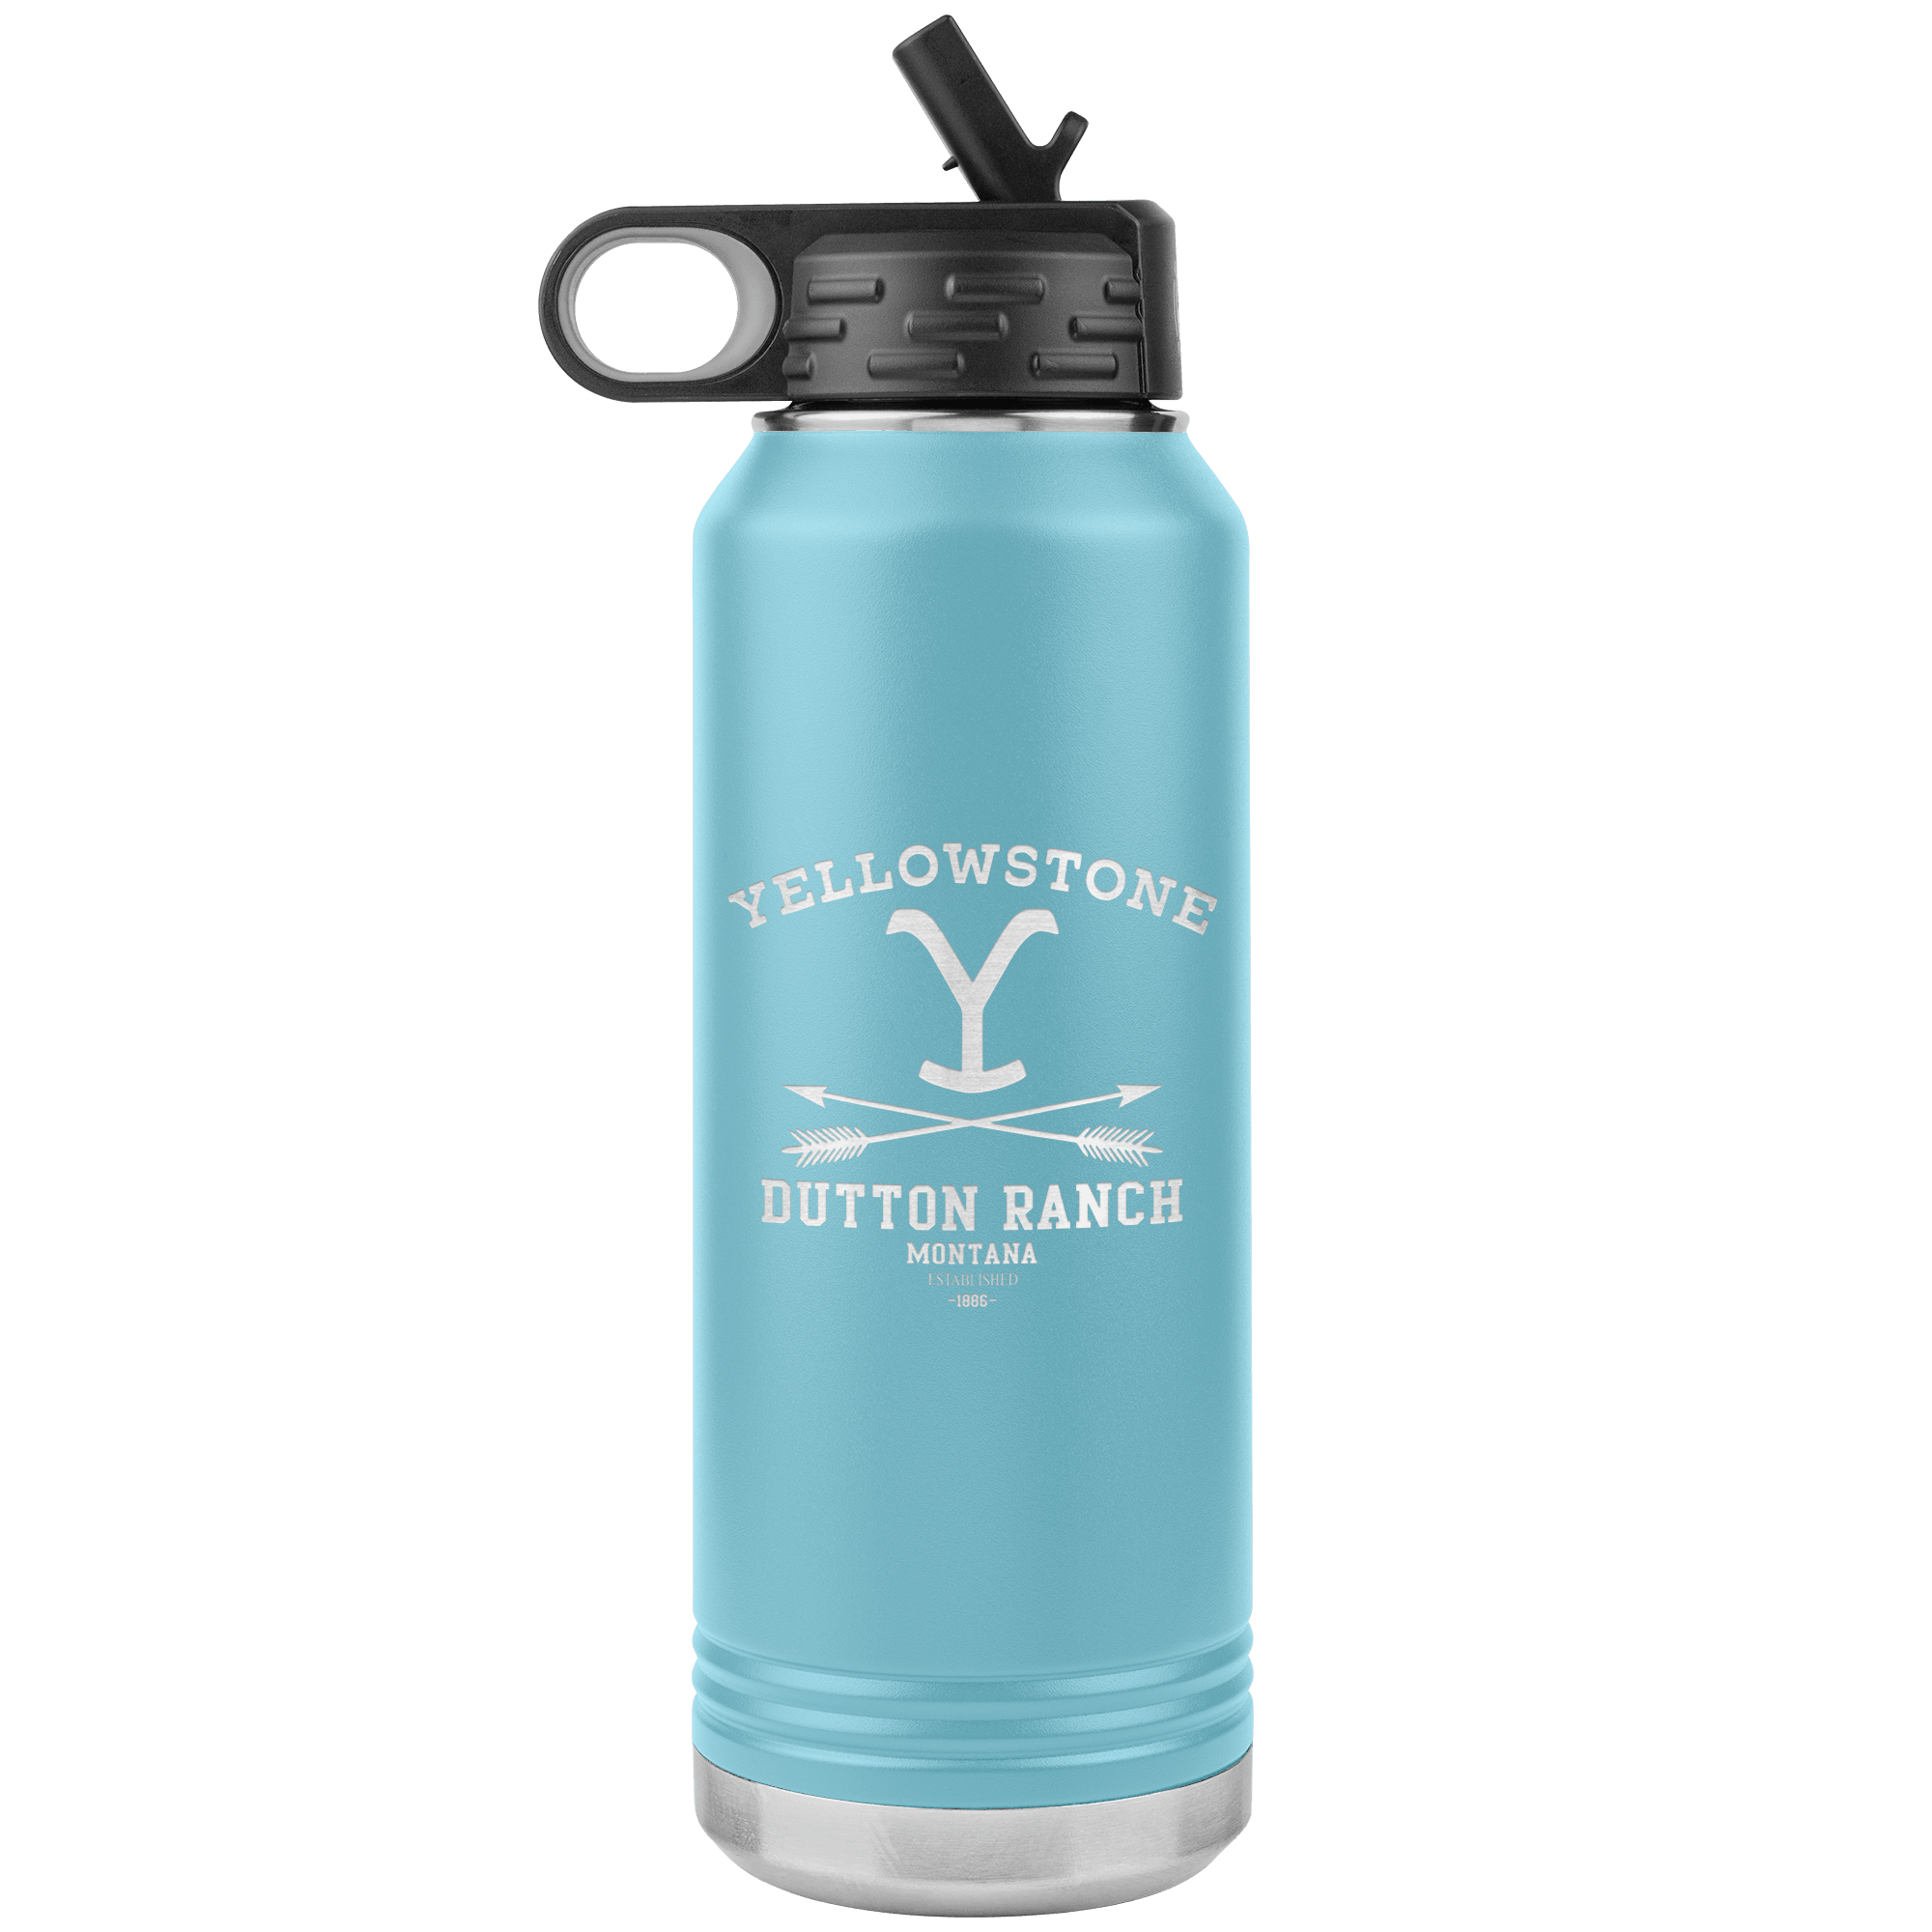 POST RANCH WATER BOTTLE – The Post Ranch Mercantile